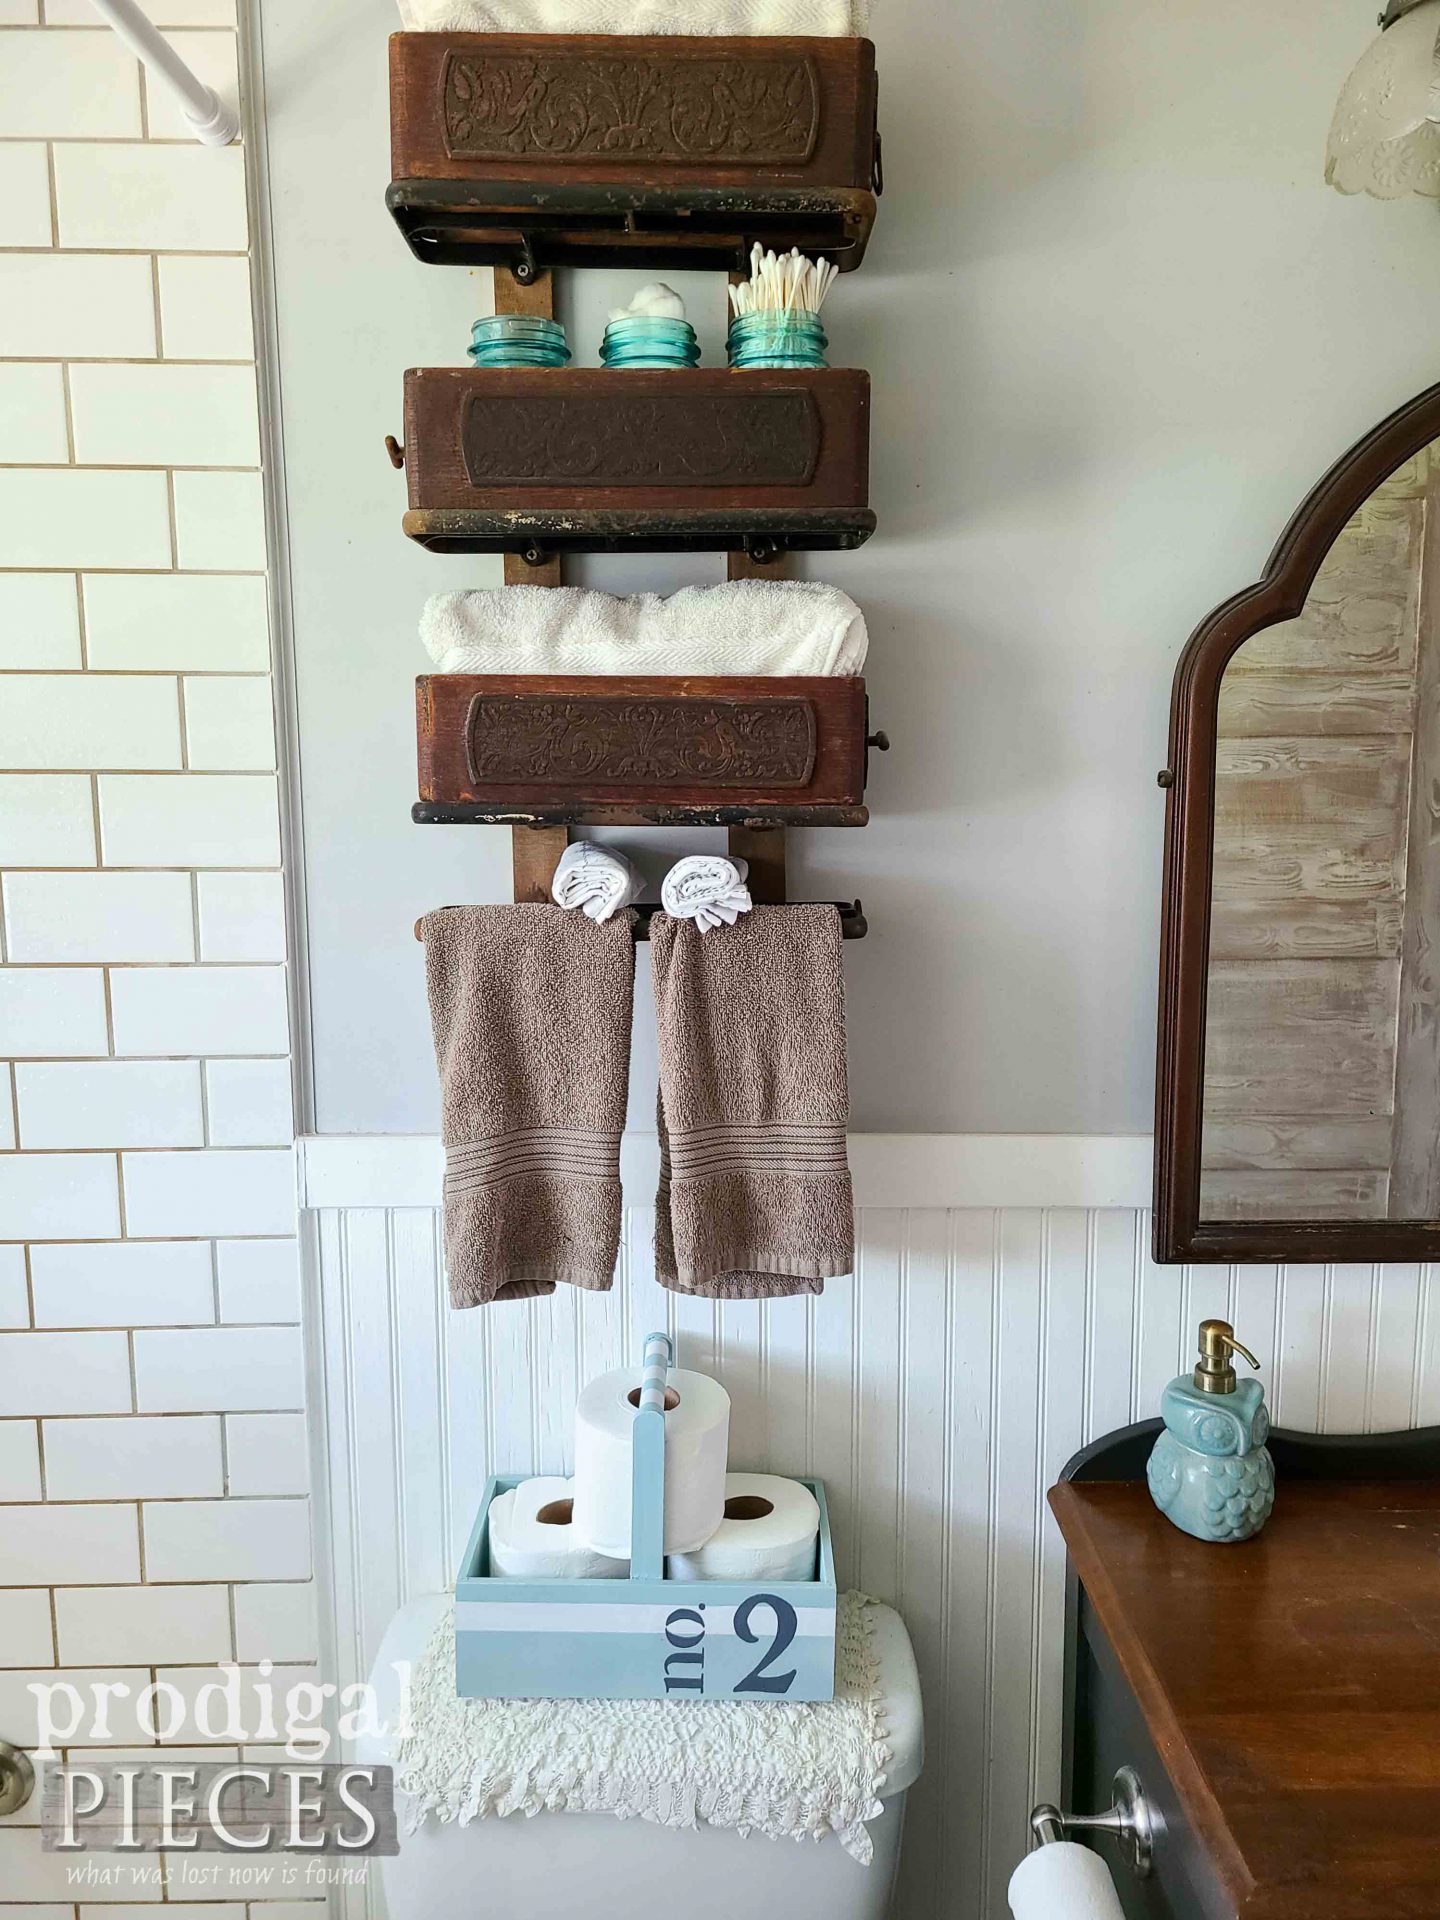 Farmhouse Bathroom Decor from Salvaged Finds ~ Farmhouse Totes by Larissa of Prodigal Pieces | prodigalpieces.com #prodigalpieces #diy #homedecor